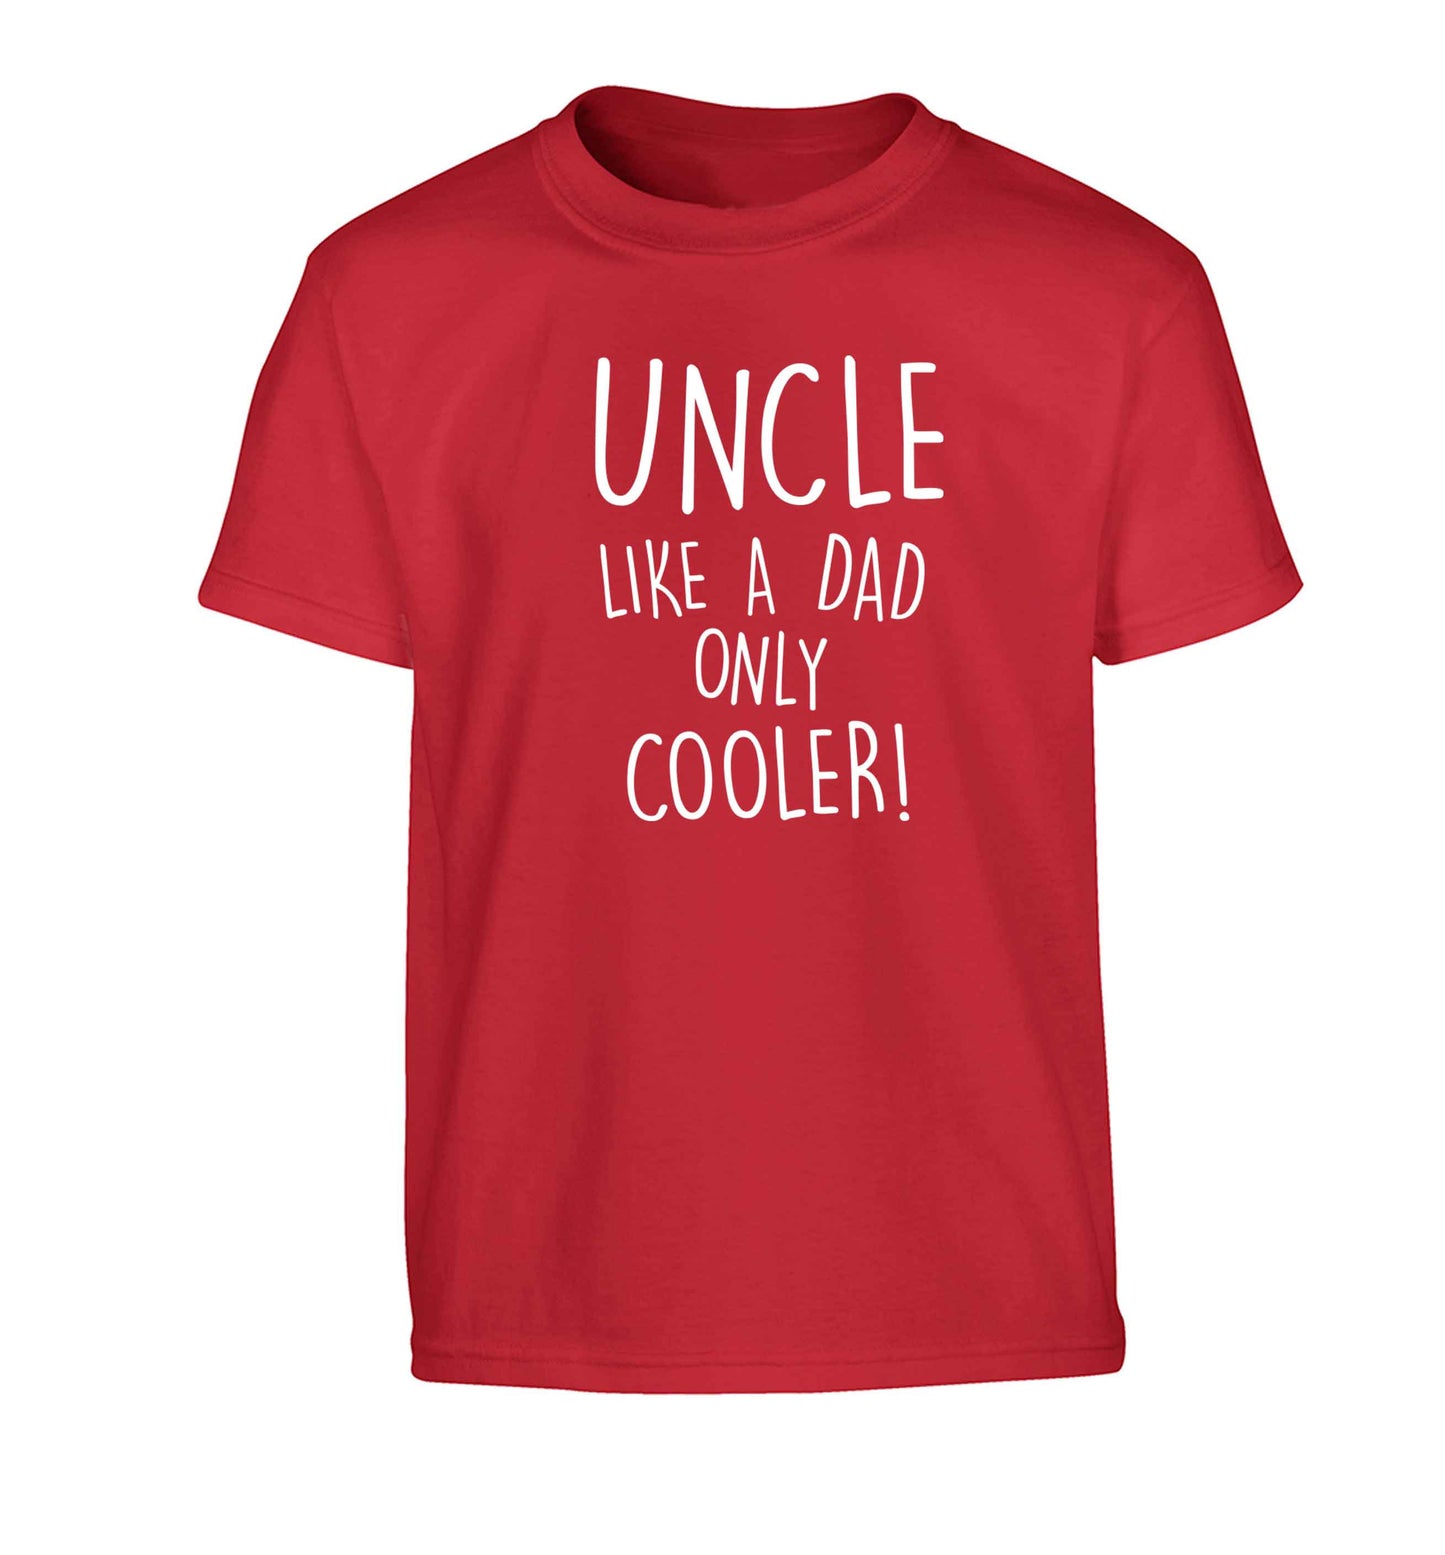 Uncle like a dad only cooler Children's red Tshirt 12-13 Years